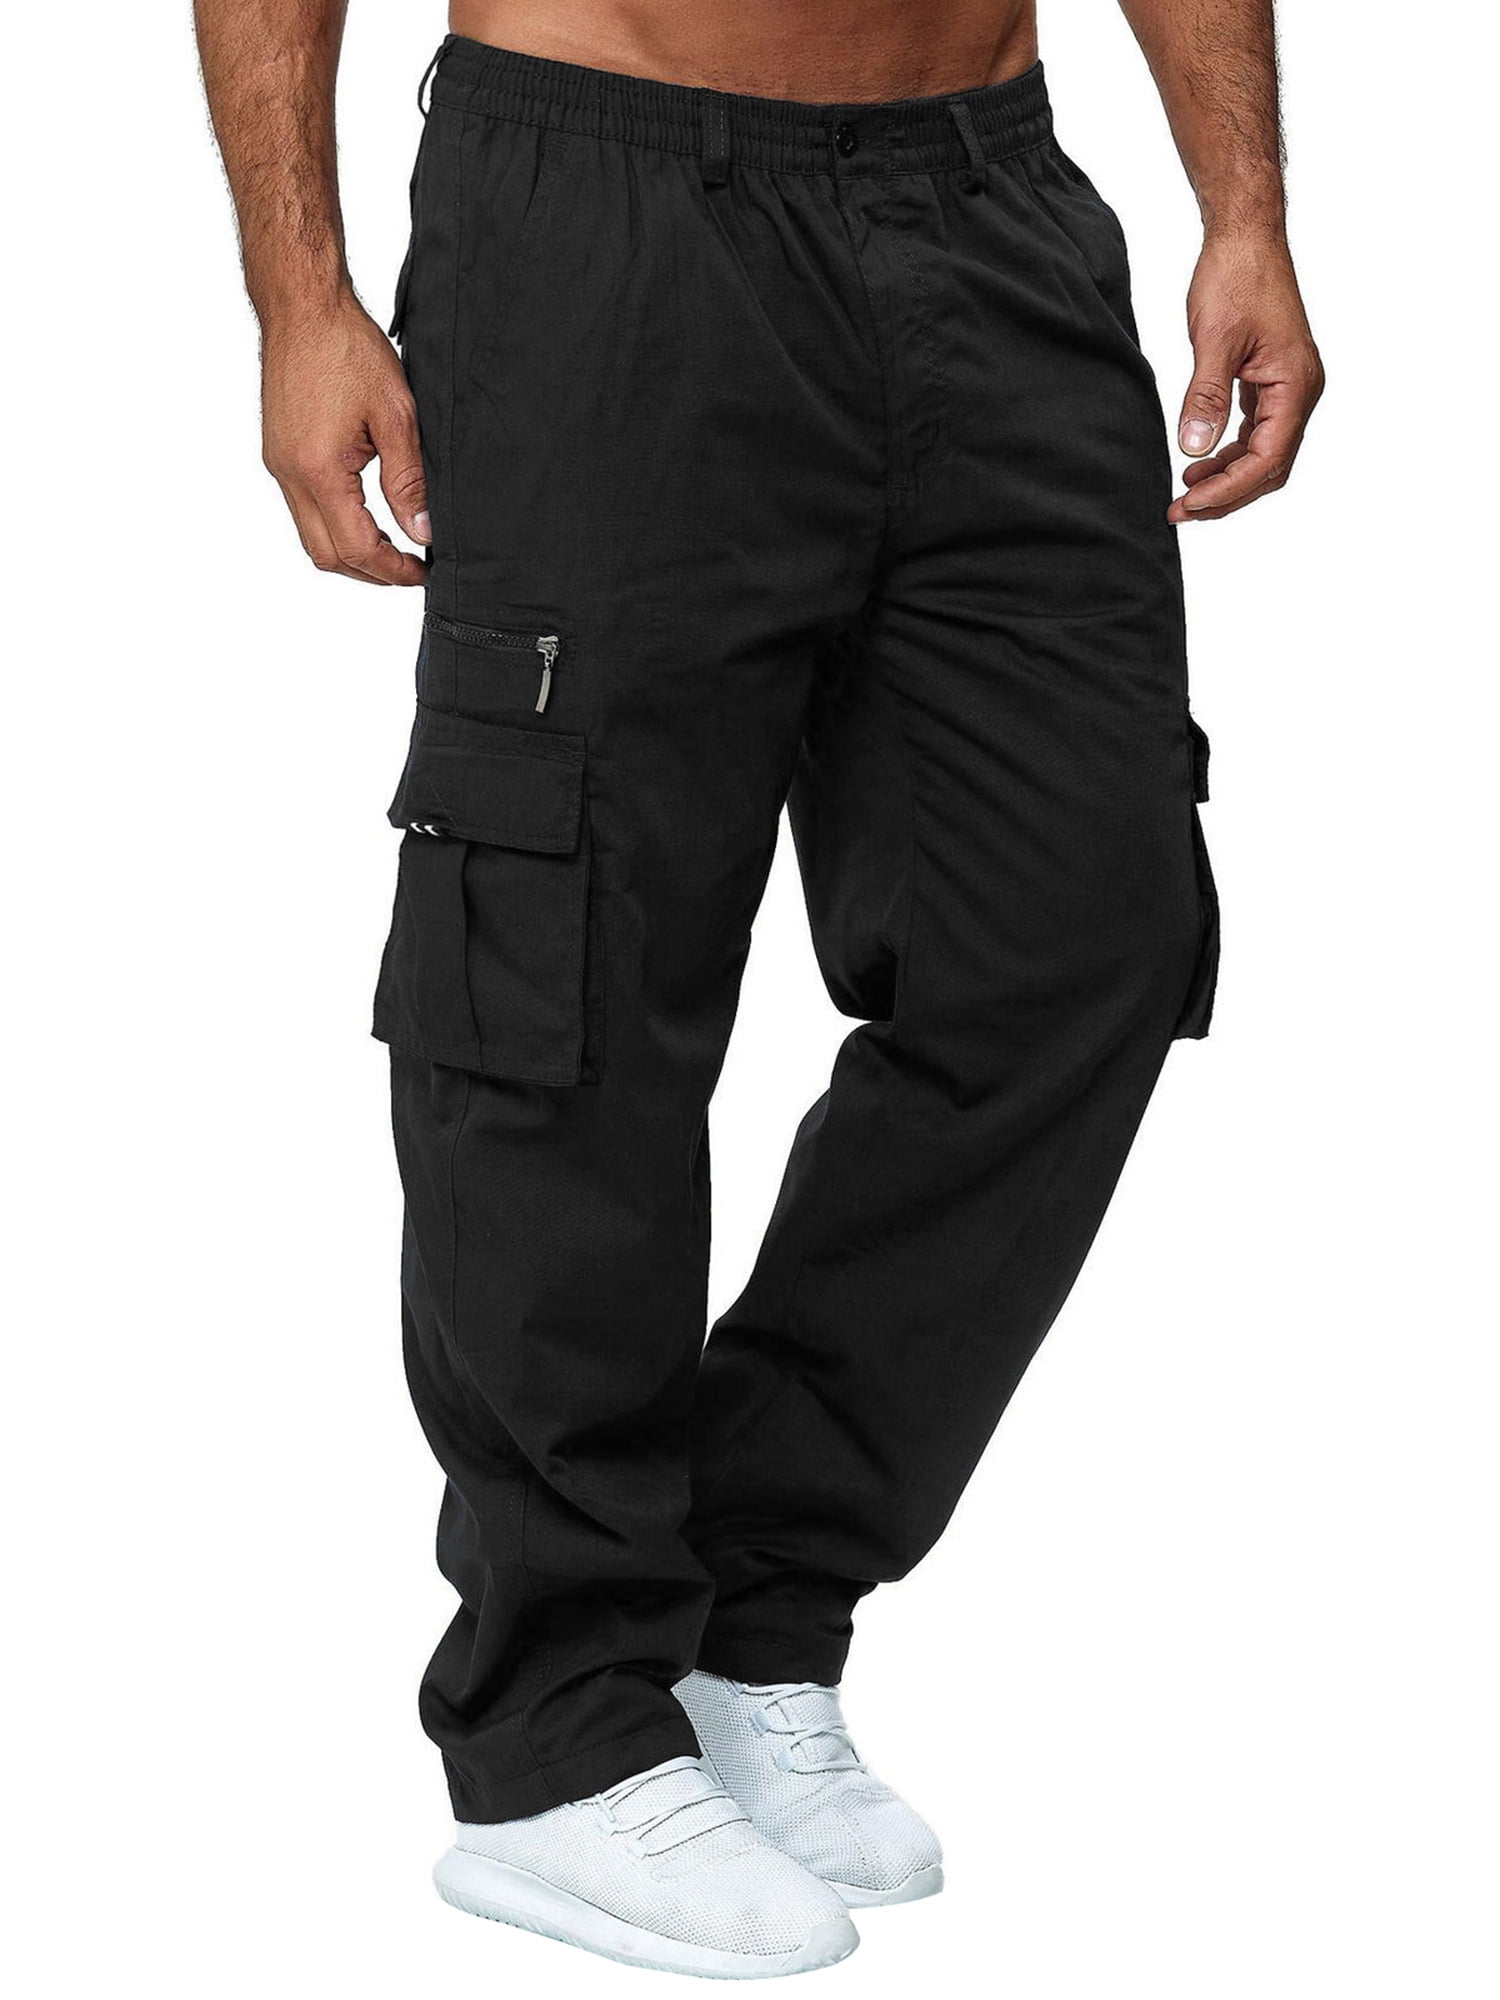 Diconna Men's Relaxed Fit Straight Leg Cargo Pants Cotton Trousers Long  Pants with Pockets Black XXL